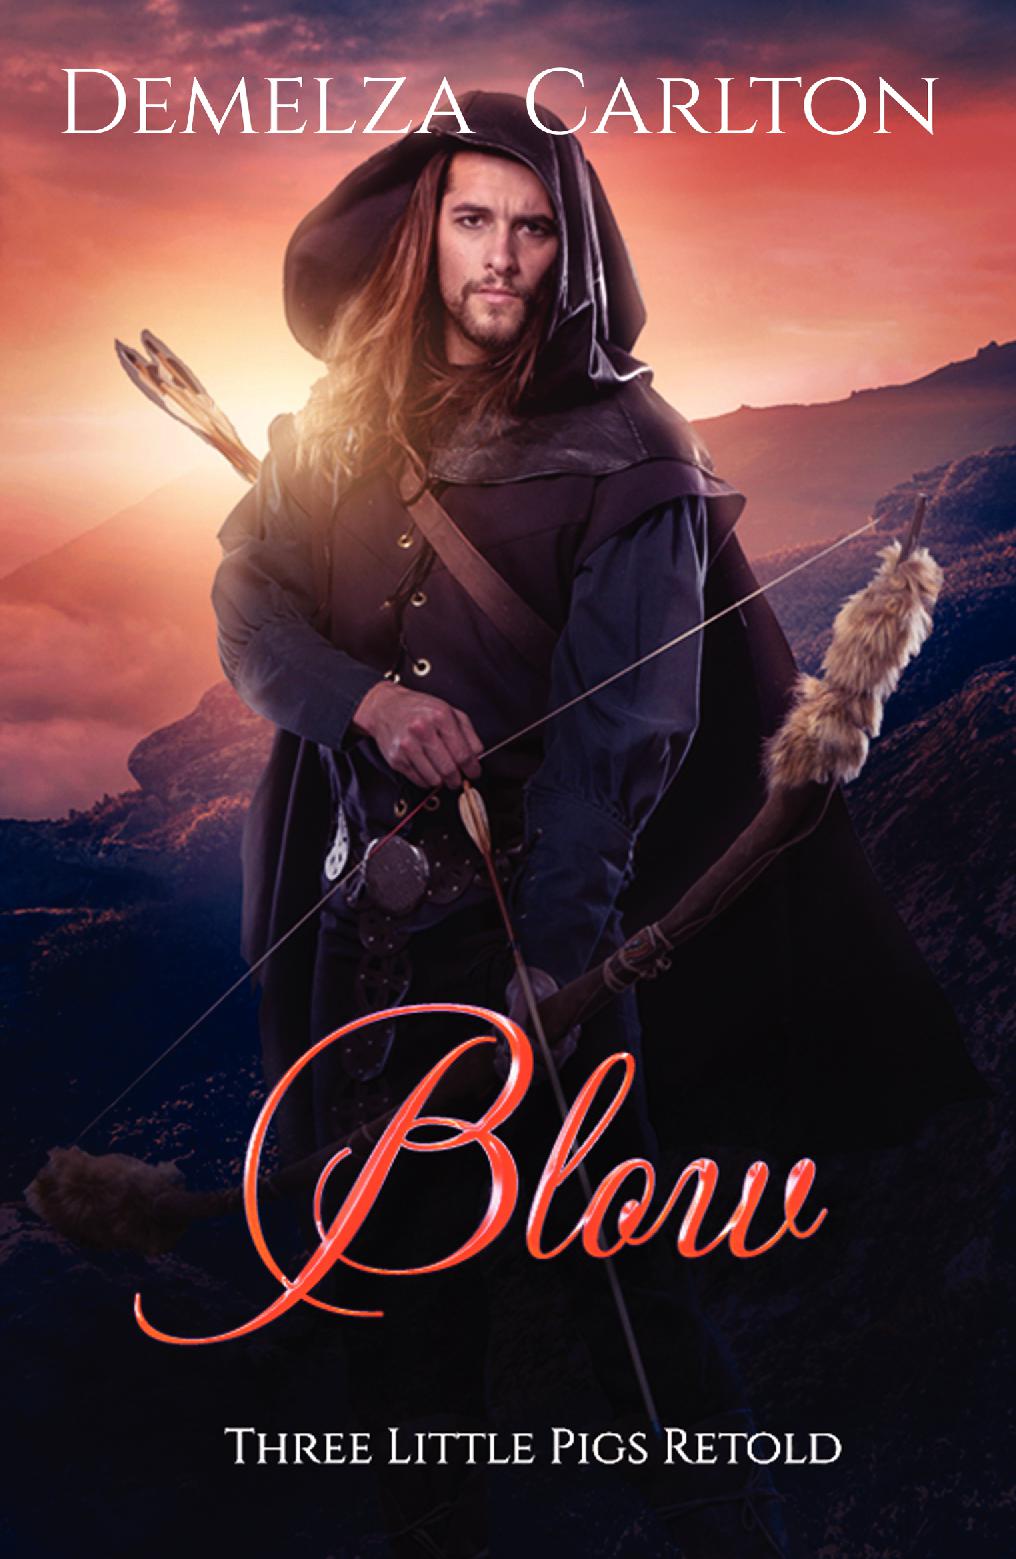 Blow: Three Little Pigs Retold (Book 9 in the Romance a Medieval Fairytale series) PAPERBACK